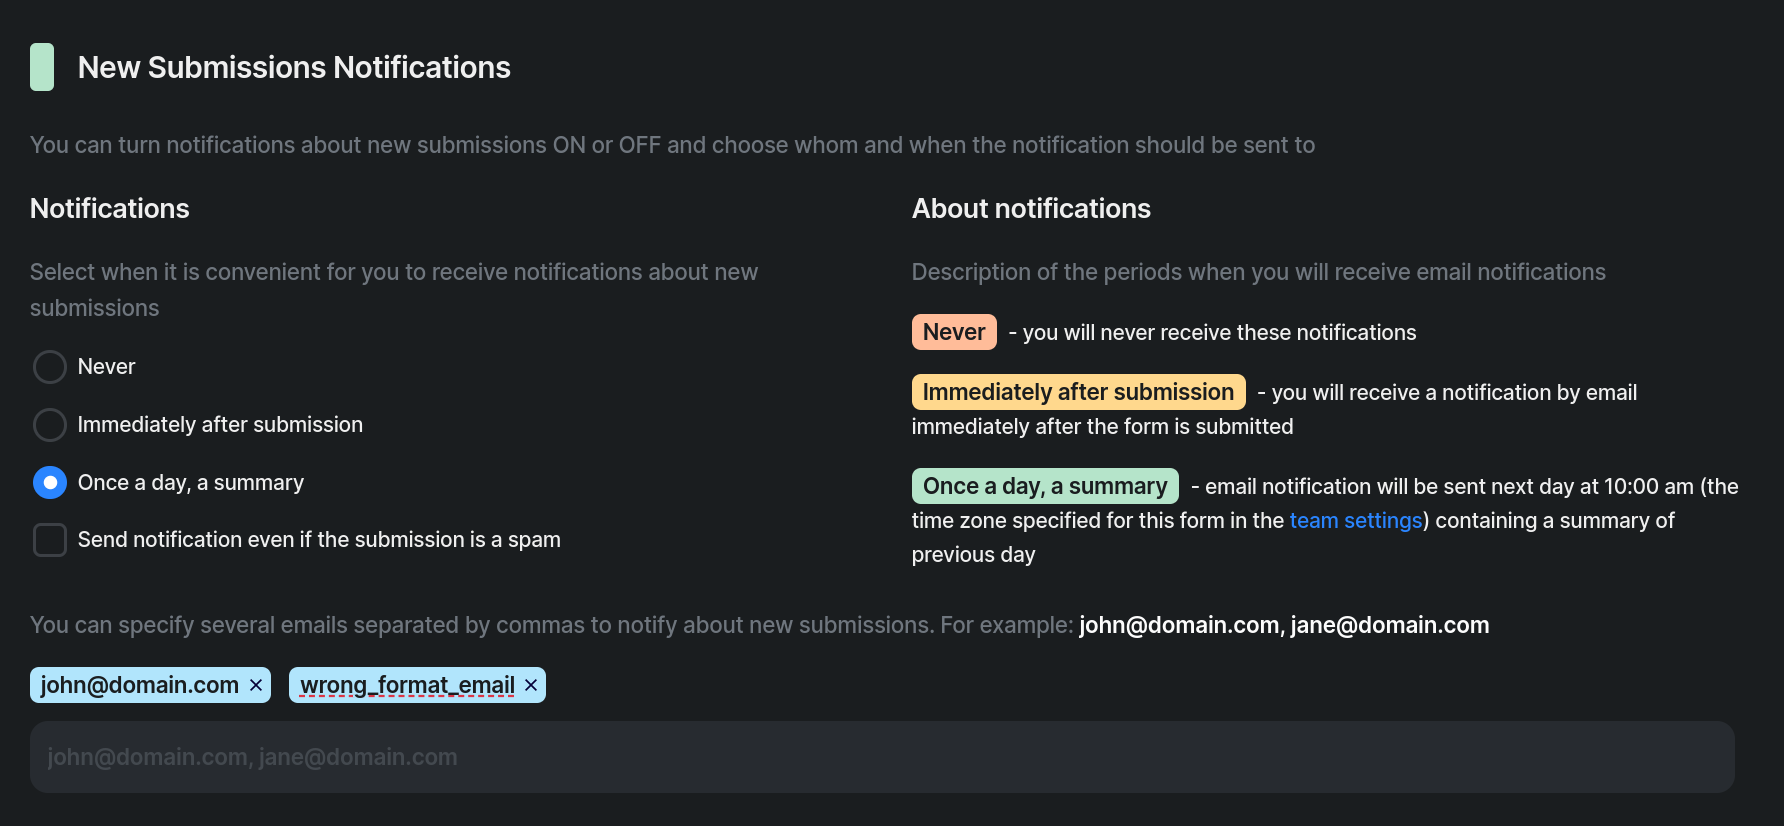 New Submission Notifications